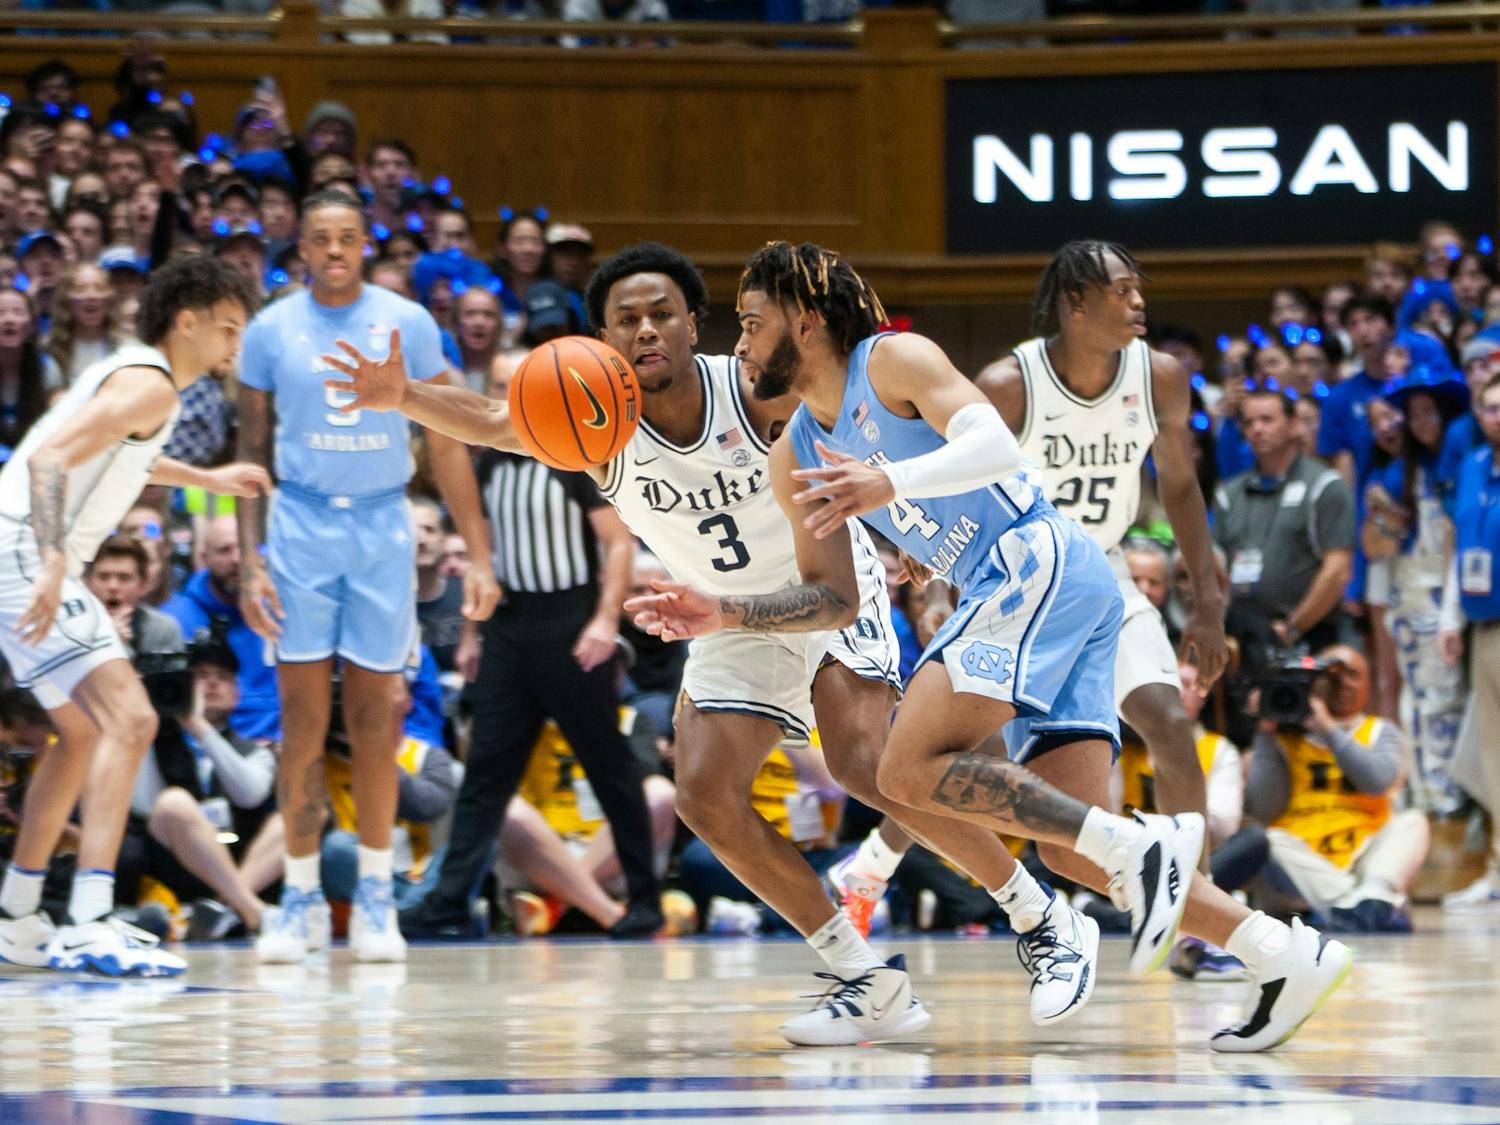 UNC junior guard RJ Davis (4) drives the ball to the basket during the men's basketball game against Duke on Feb. 4, 2023 at Cameron Indoor Stadium. UNC lost 63-57.